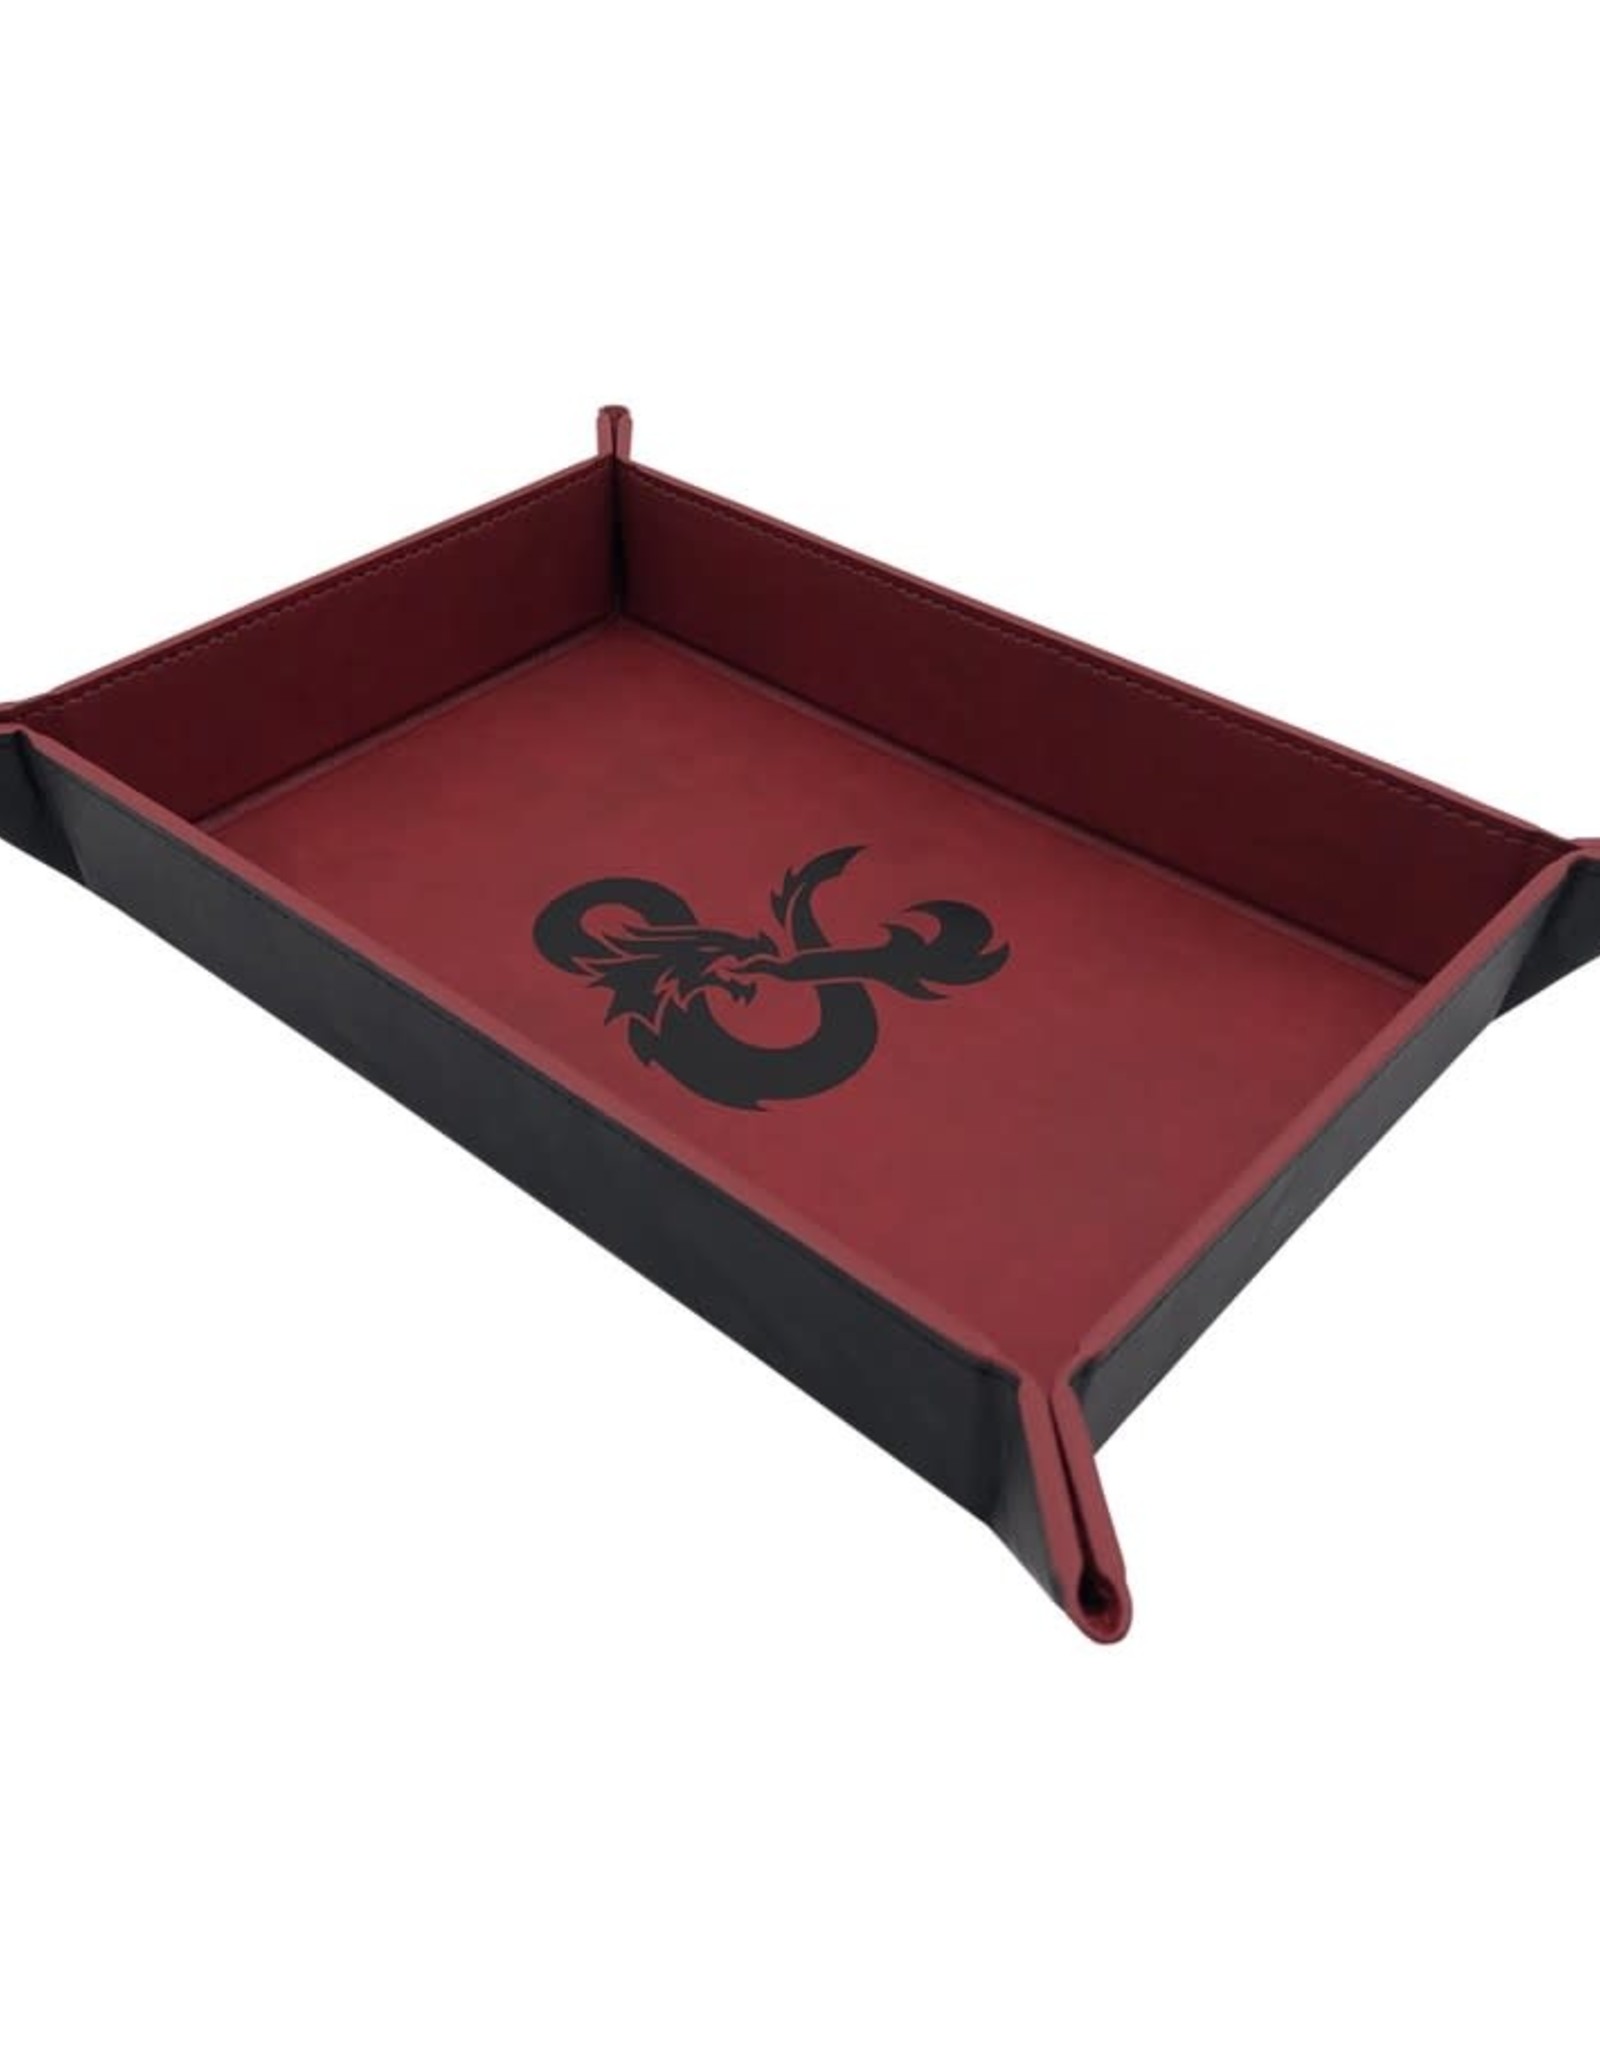 Foldable Dice Tray: Red/Black